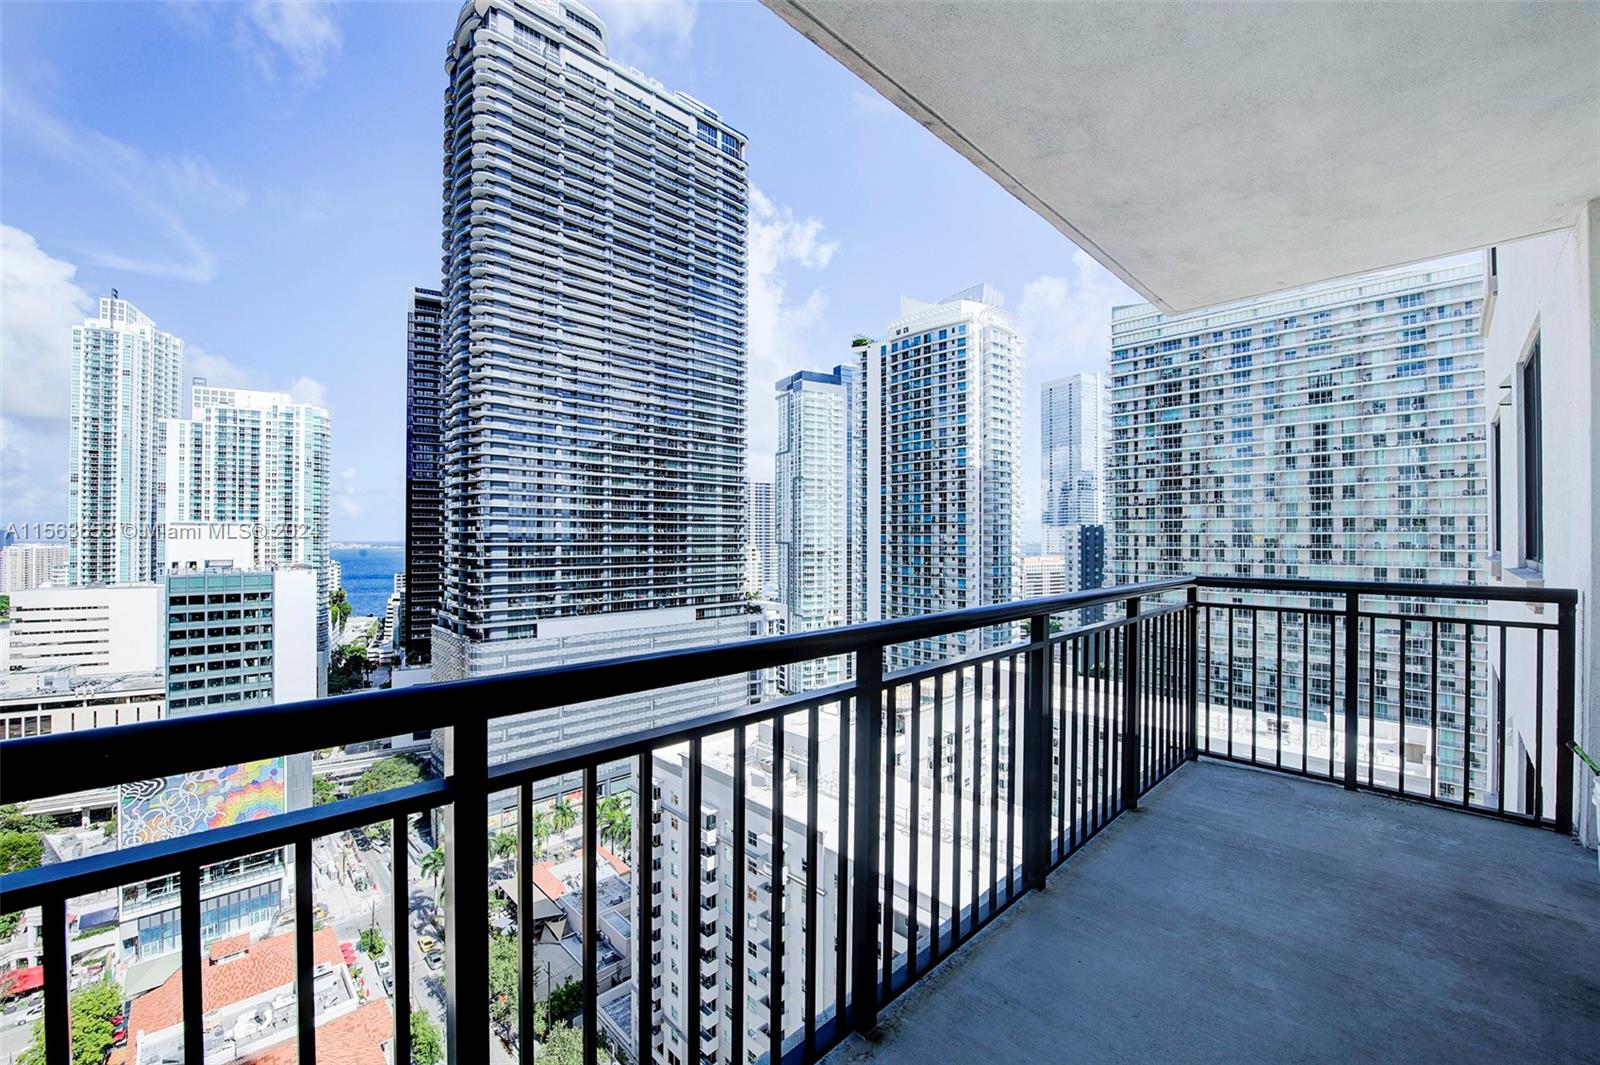 Nine on Brickell "Situated in the heart of Brickell, offers a stunning two-bedrooms apartment boasting magnificent wires and top- of- the- line amenities, conveniently located next to publix supermarket, with easy access to LA Fitness and Mary Brickell Village. This apartment provide the perfect blend of luxury and convenience"